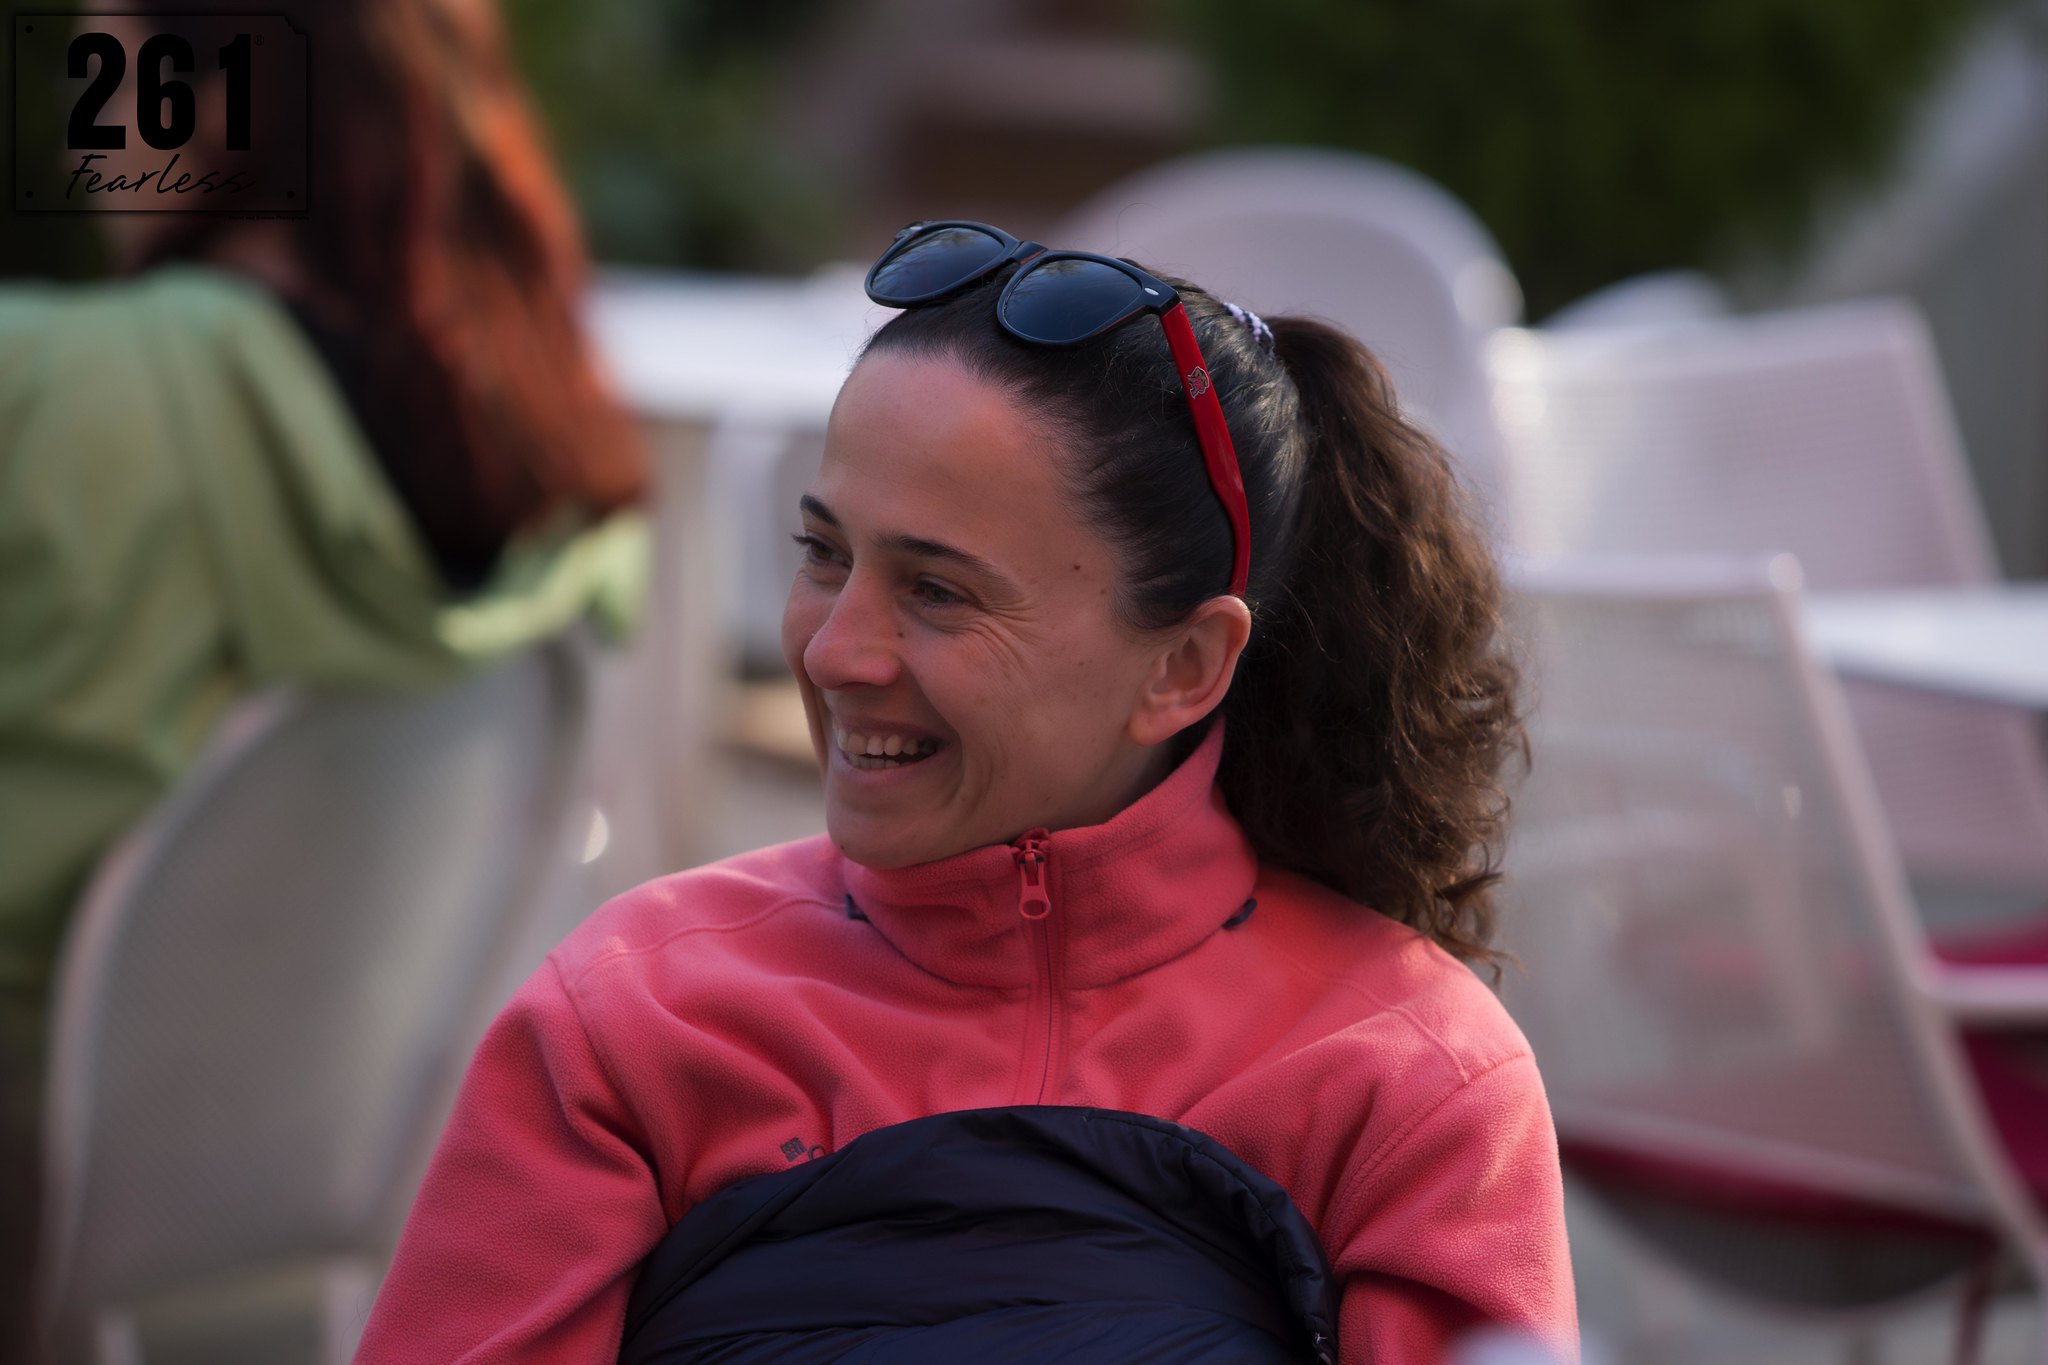 A woman from 261 Fearless Club Albania smiles warmly, wearing a pink fleece jacket and sunglasses on her head, showcasing joy and relaxation after a run